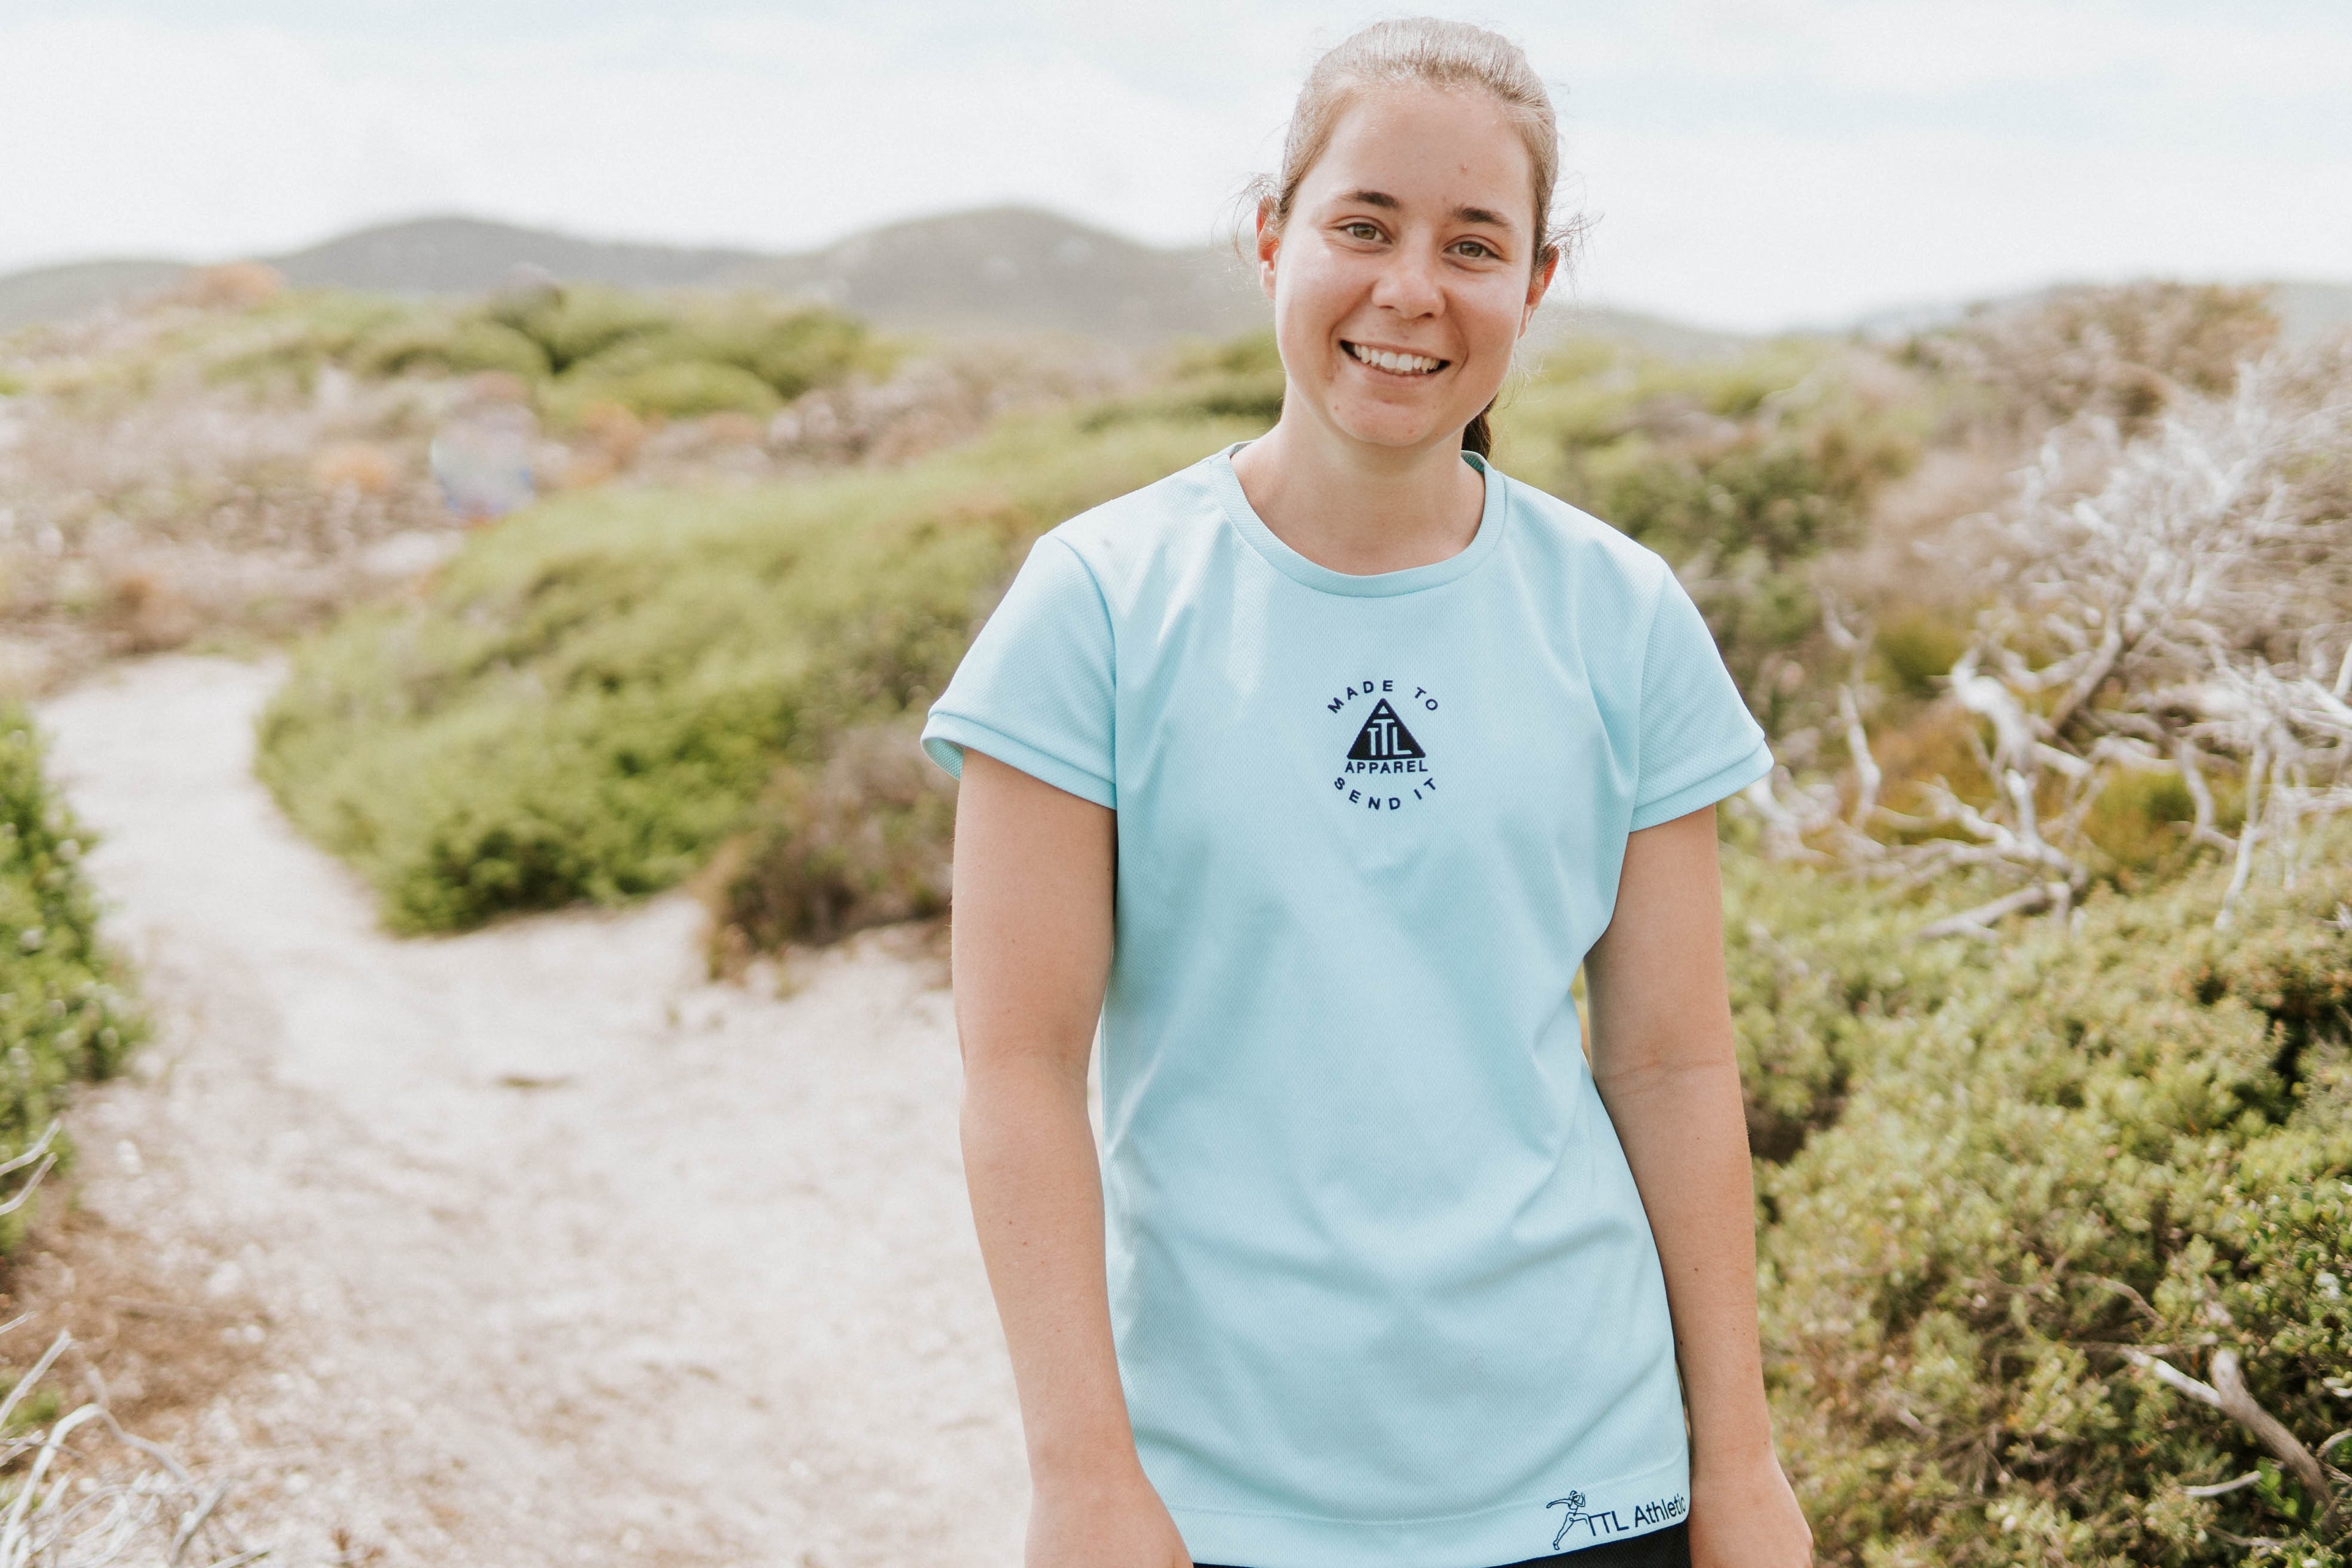 Women's running top in teal. This top is designed for trail running, street running or your favourite workout. Made to breath and move with you and it's made in Australia from recycled material. 